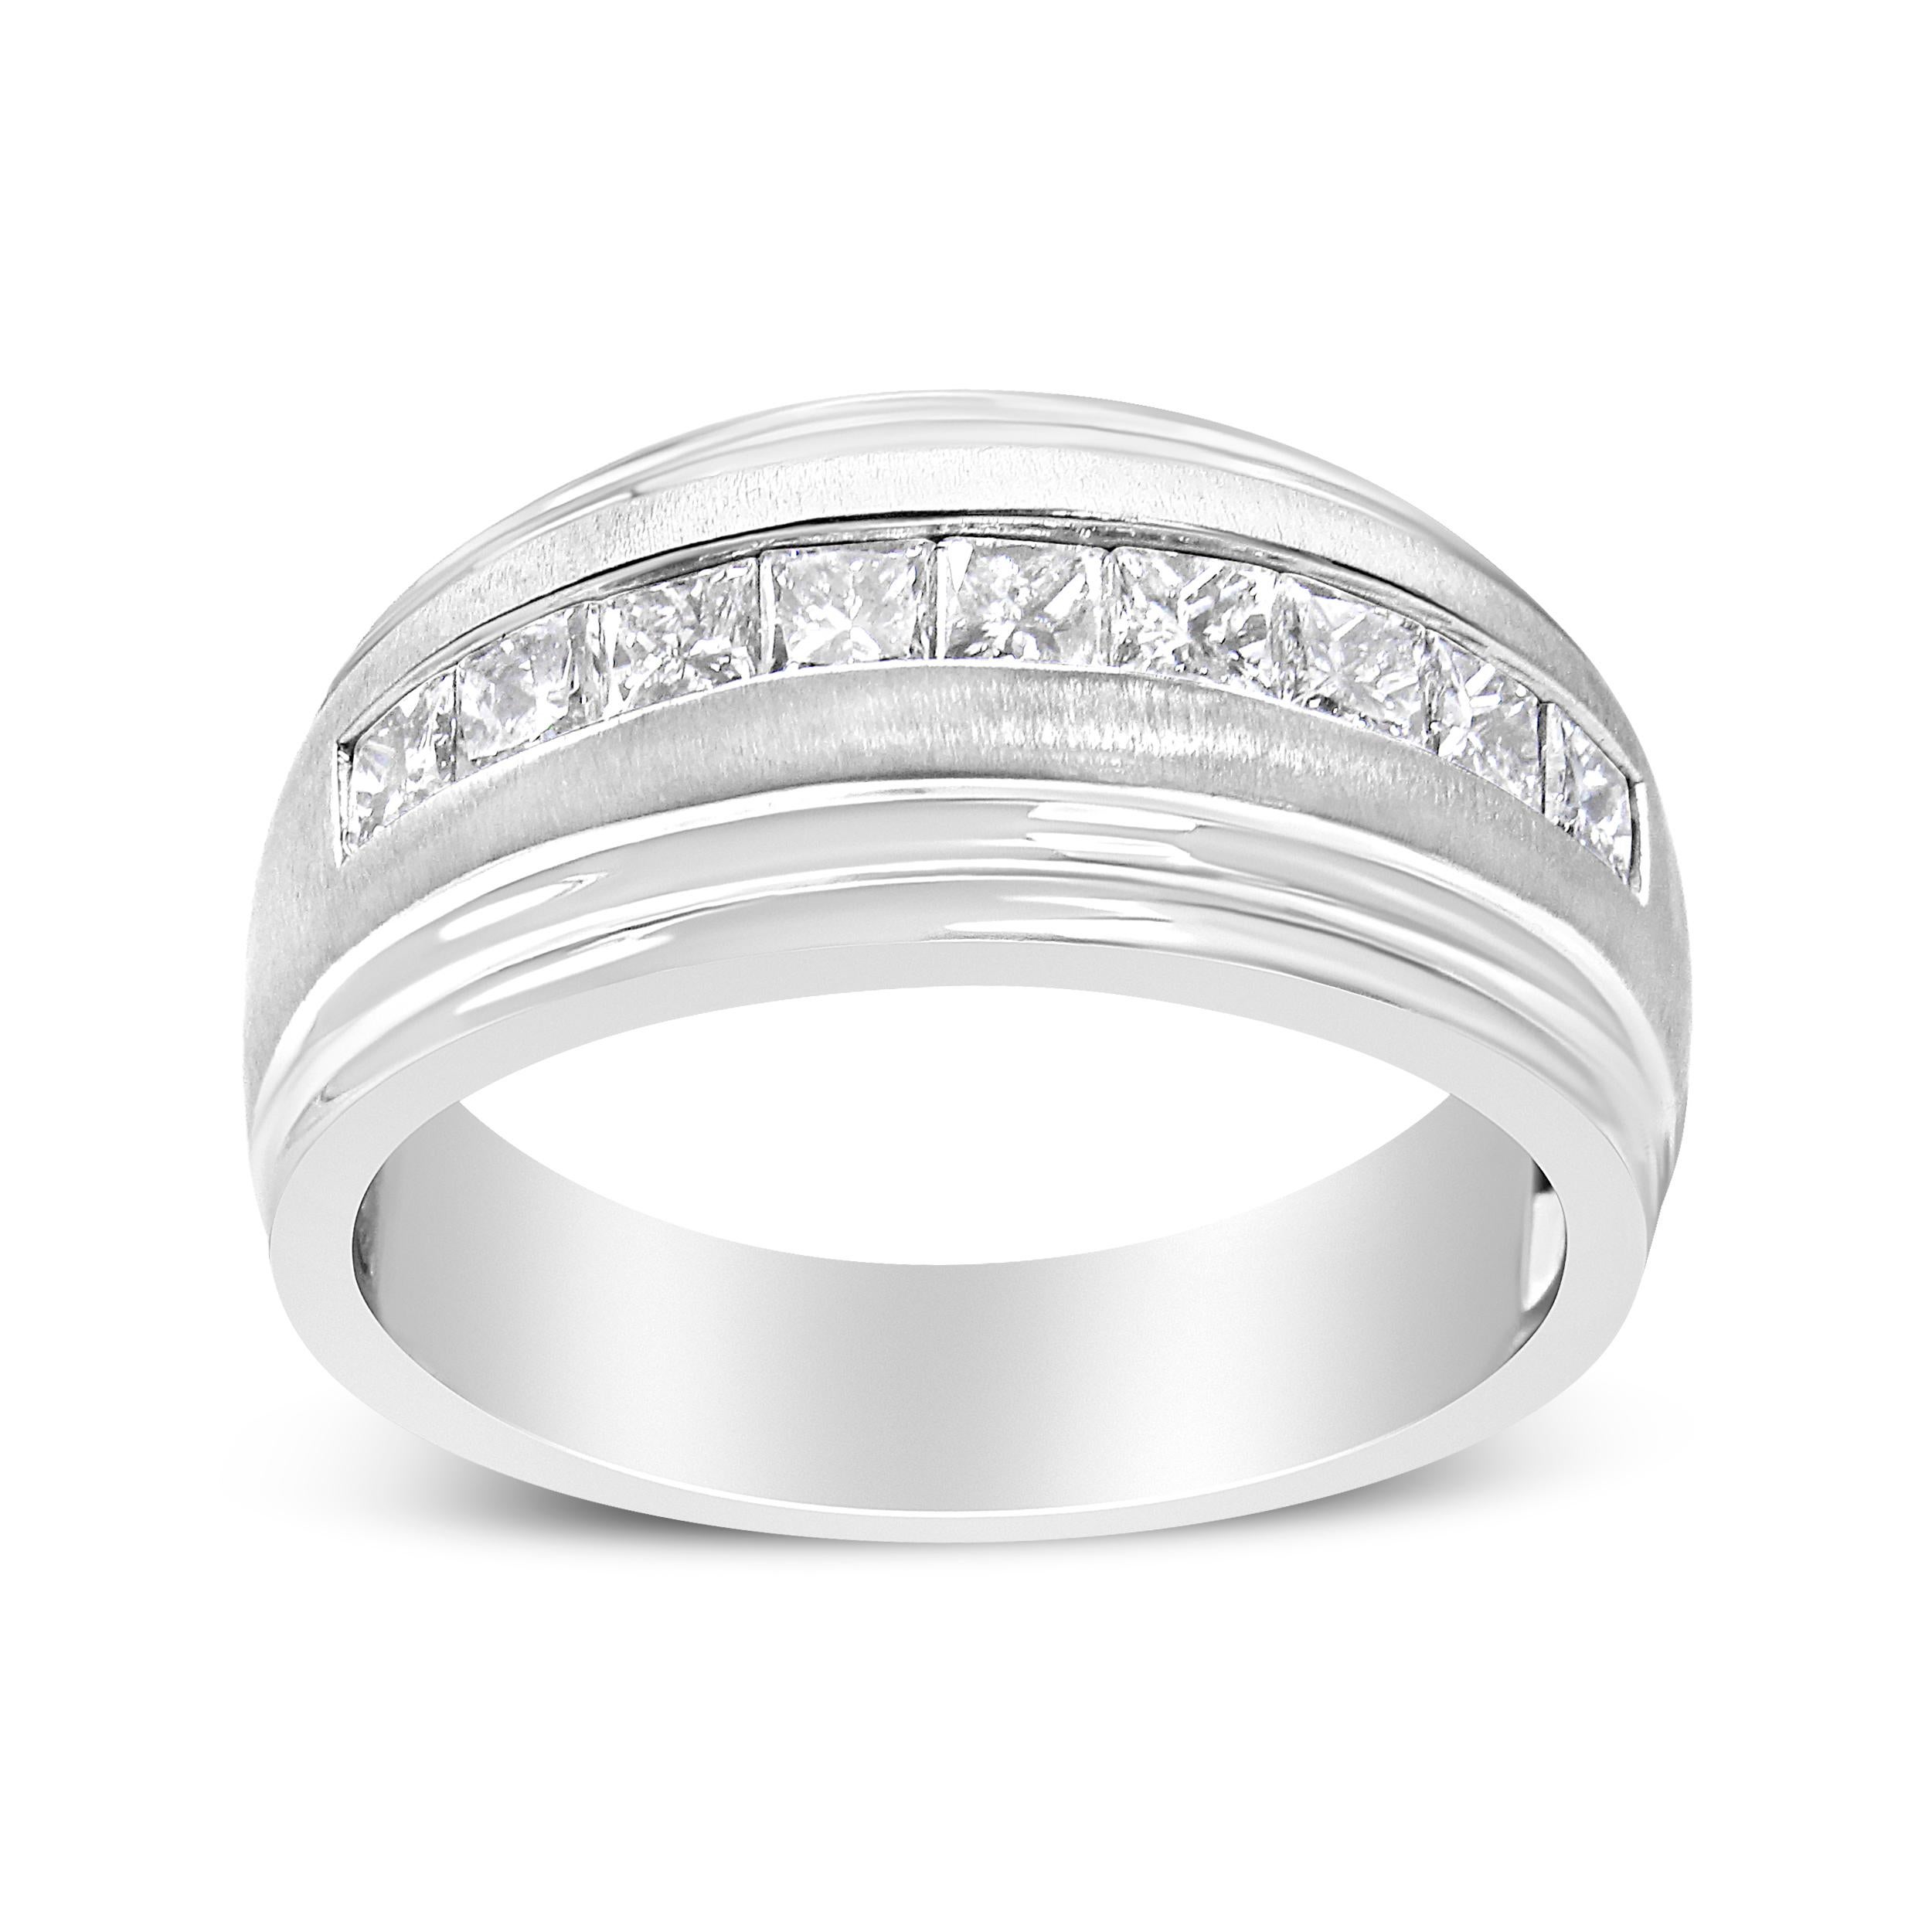 Say your vows as you slip this stunning certified diamond wedding band onto his finger. Crafted in 10K white gold, this sleek design features nine princess cut diamonds - each with a color rank of H-I and clarity of I1-I2 - channel-set in between